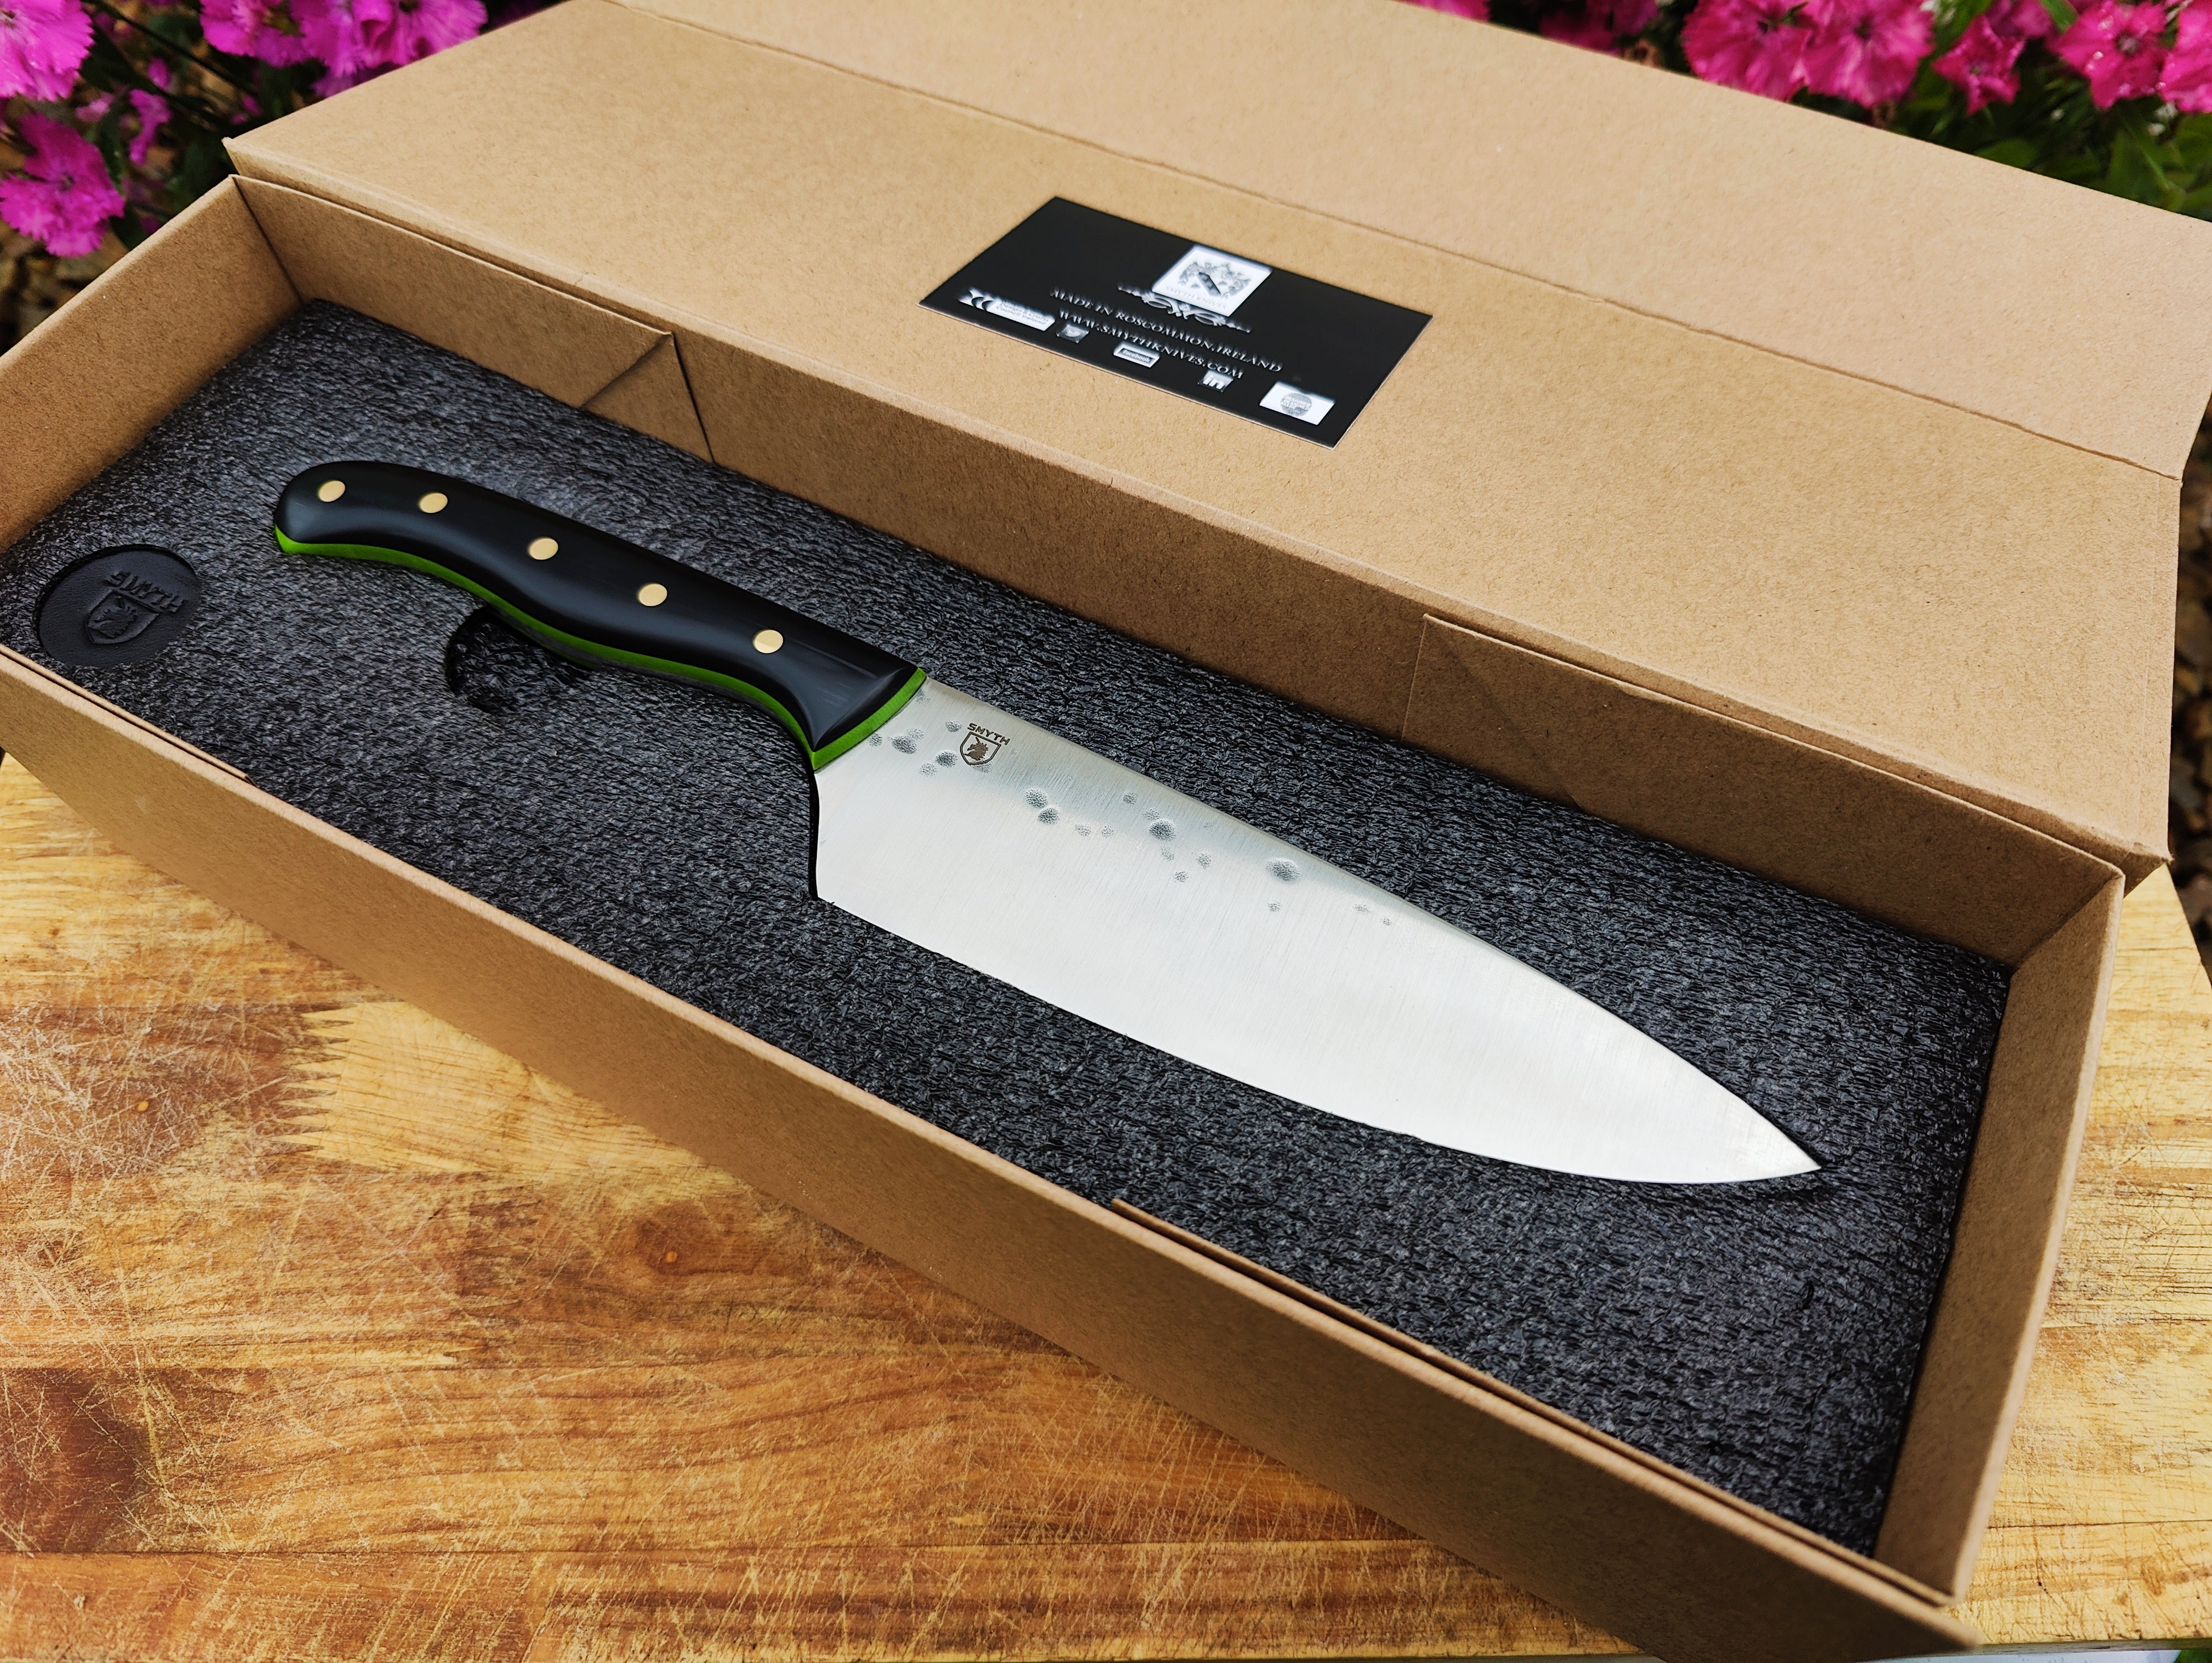 Aeb-l stainless cooks knife